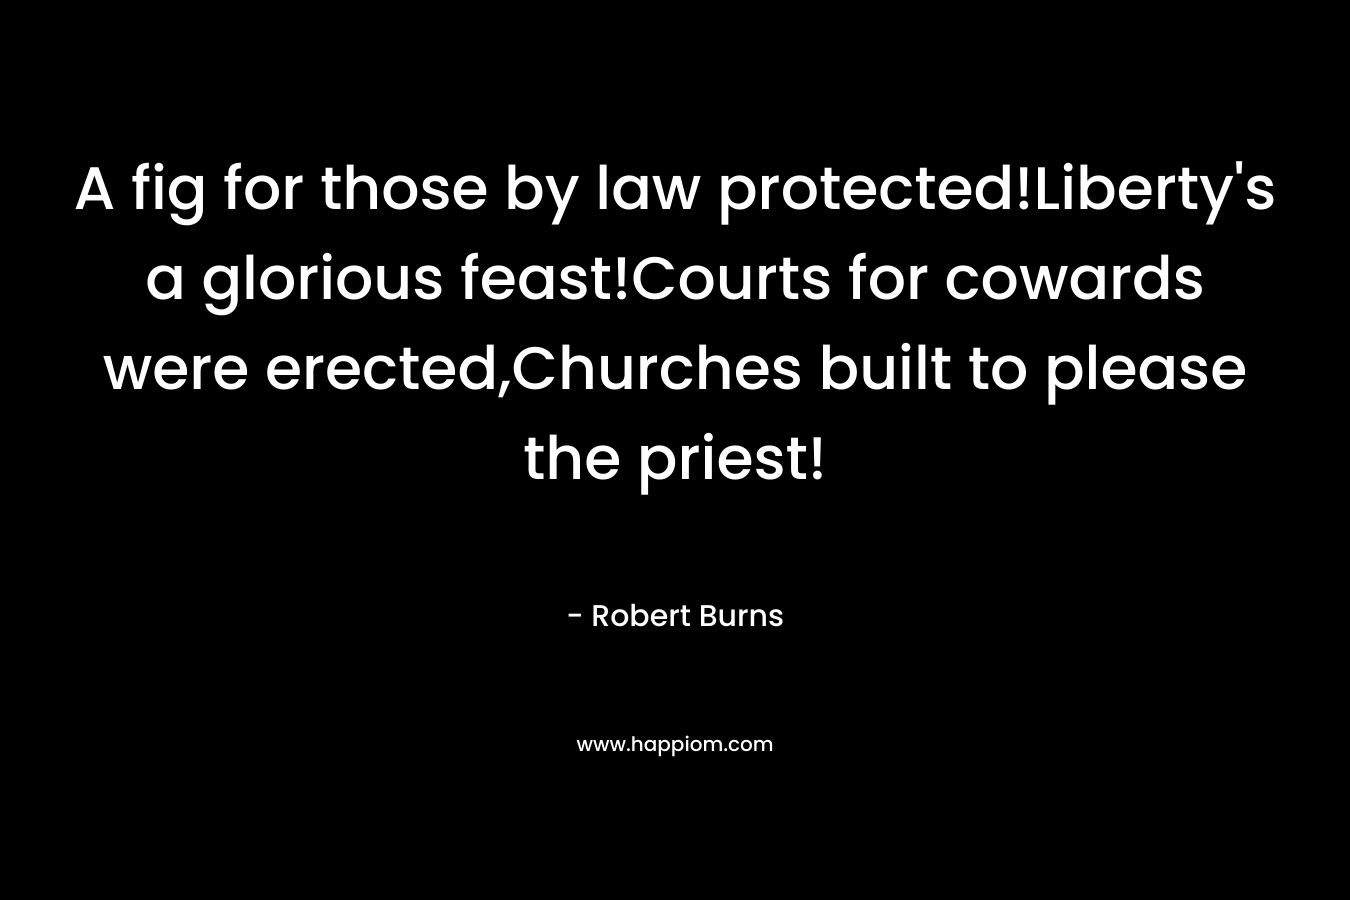 A fig for those by law protected!Liberty's a glorious feast!Courts for cowards were erected,Churches built to please the priest!